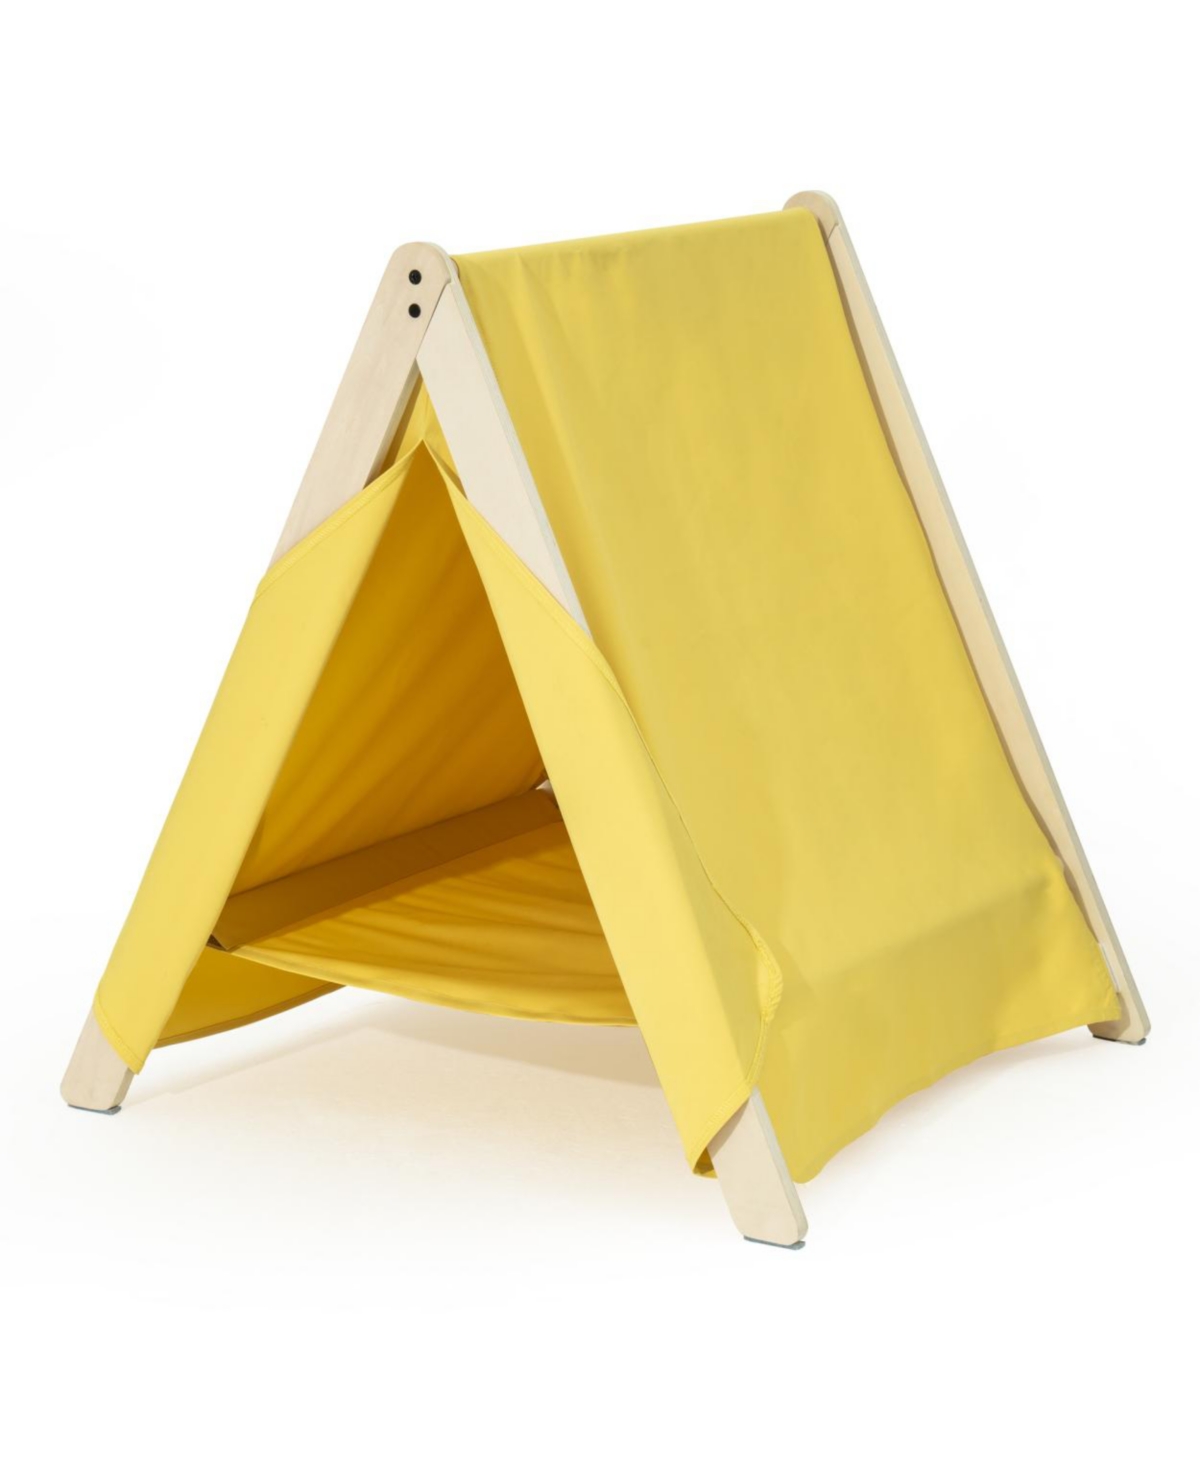 Pet Tent, Cat Tent For Indoor Cats, Wooden Cat House For Small Pets - Yellow